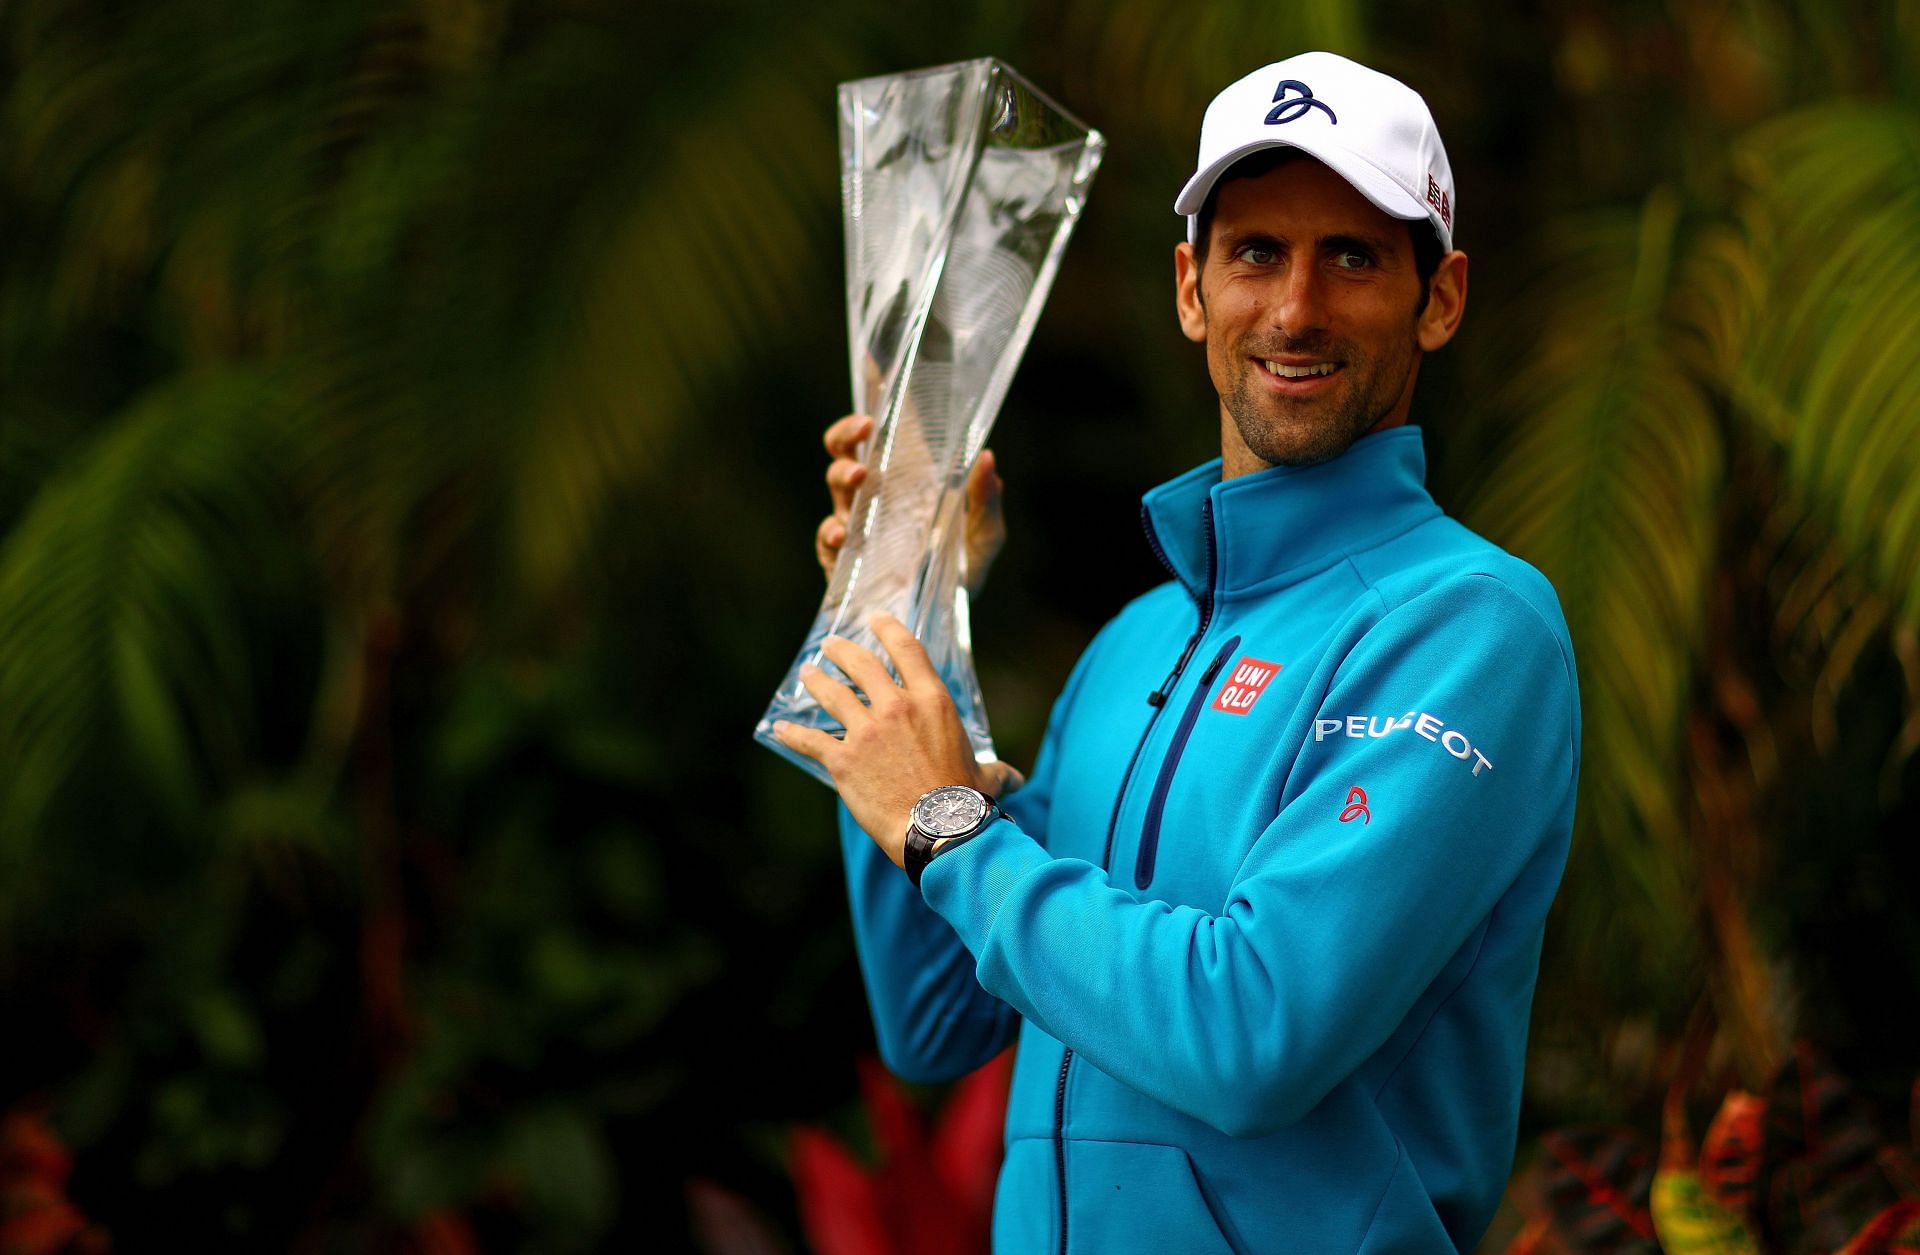 Novak Djokovic has completed the Sunshine Double four times